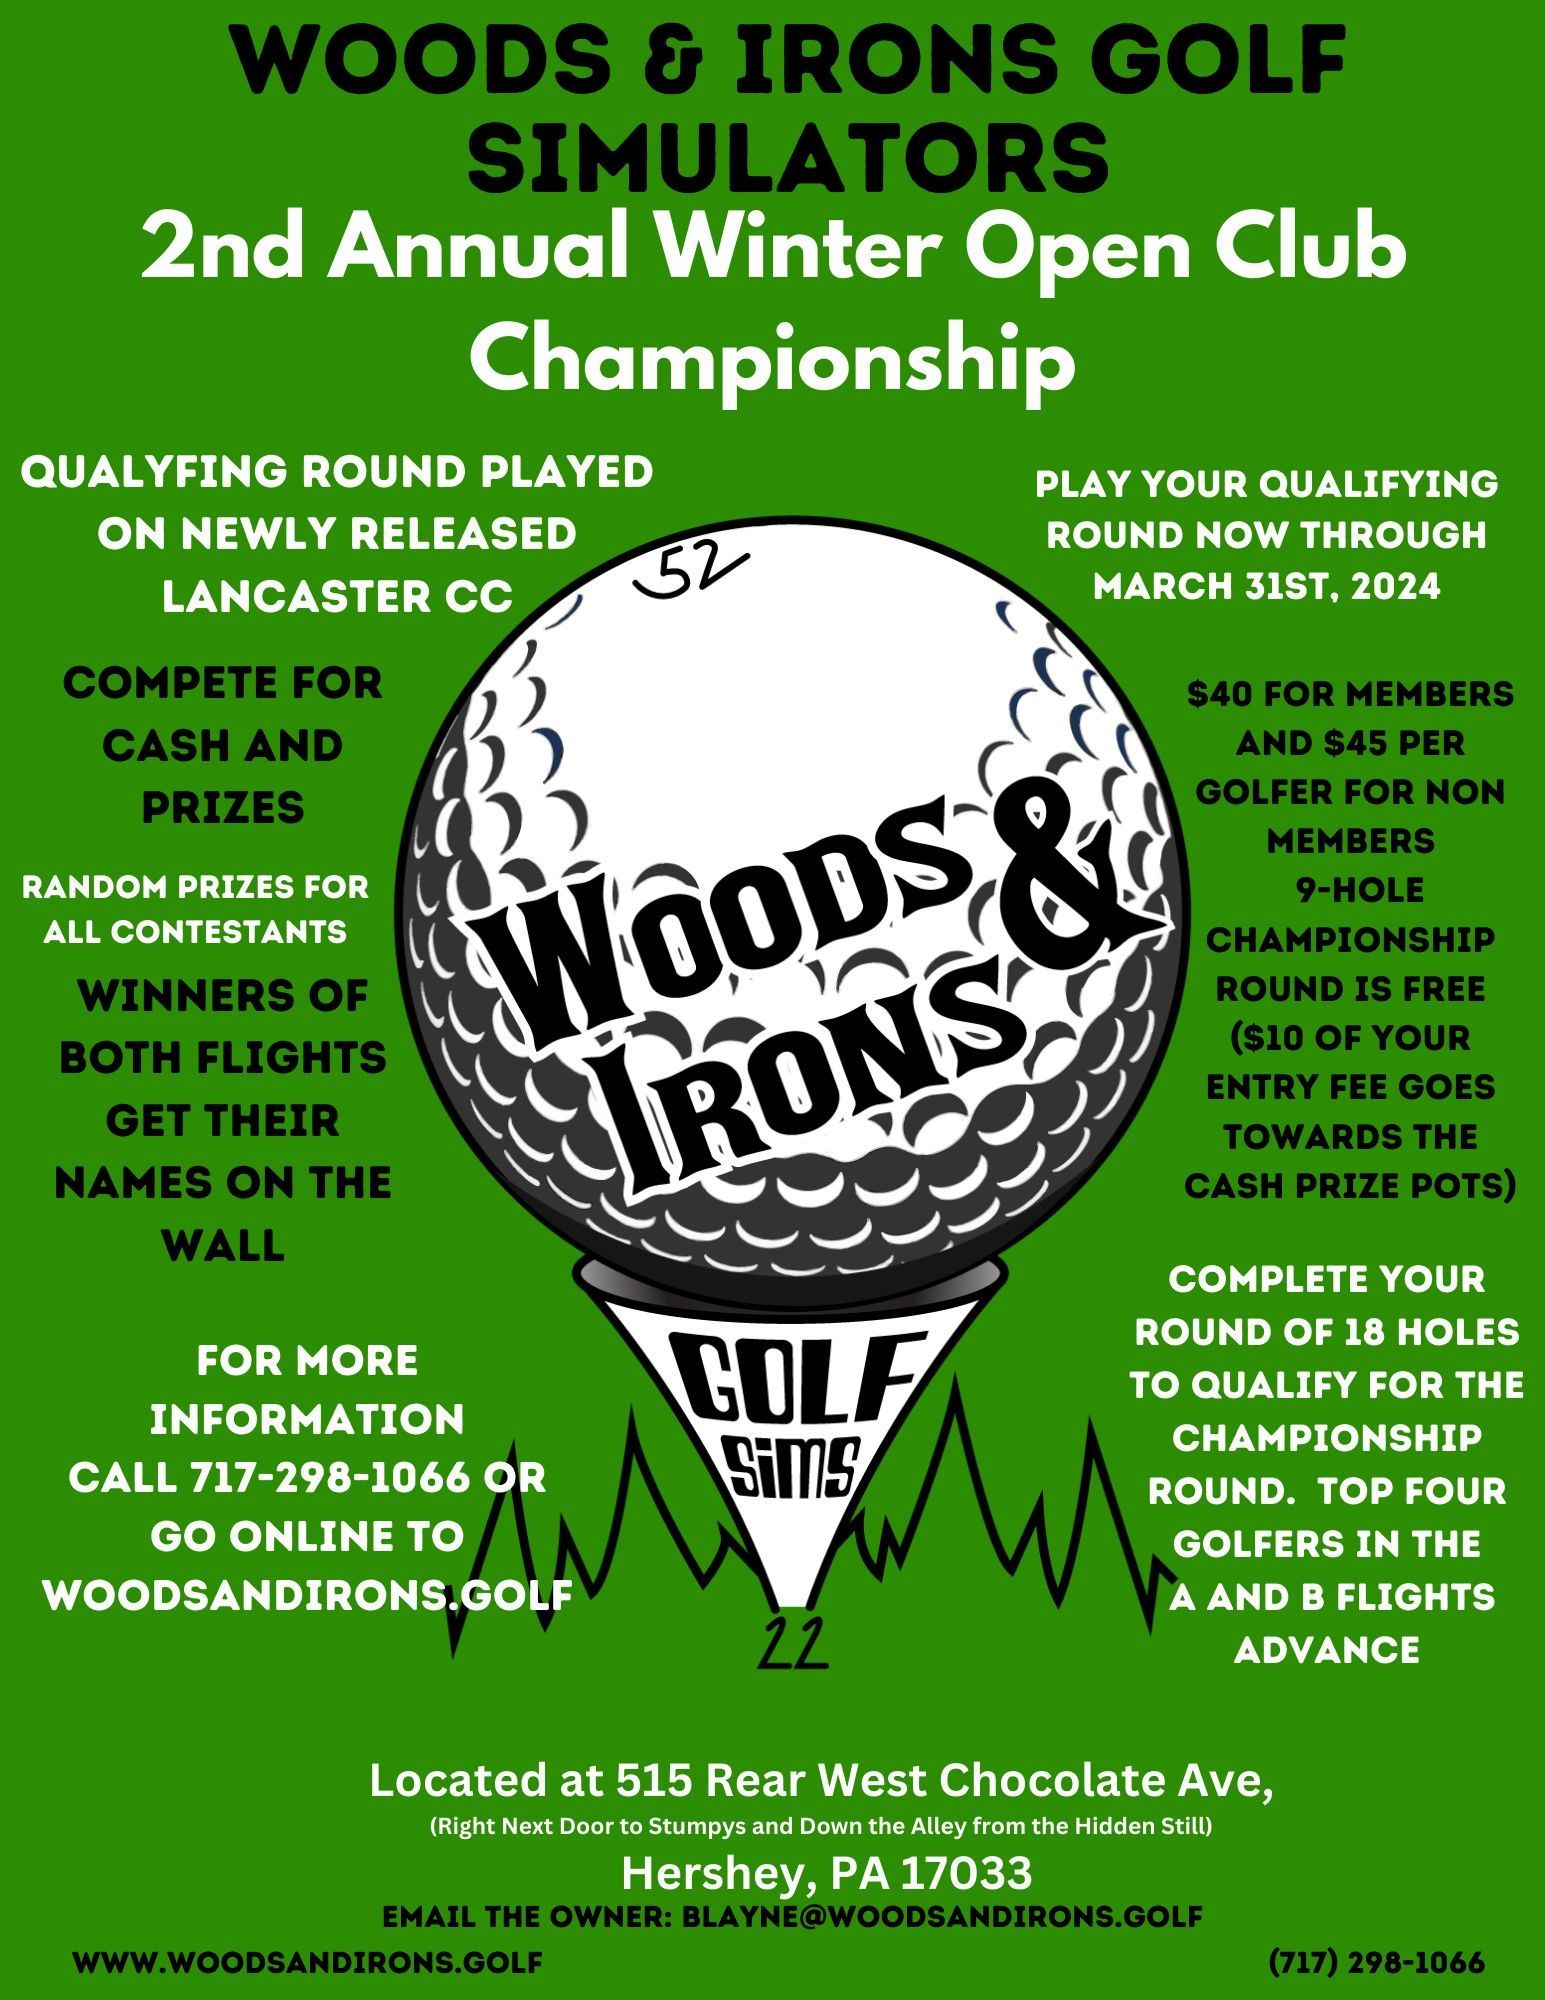 2nd Annual Winter Open Club Championship - Compete For Cash & Prizes - Woods & Irons